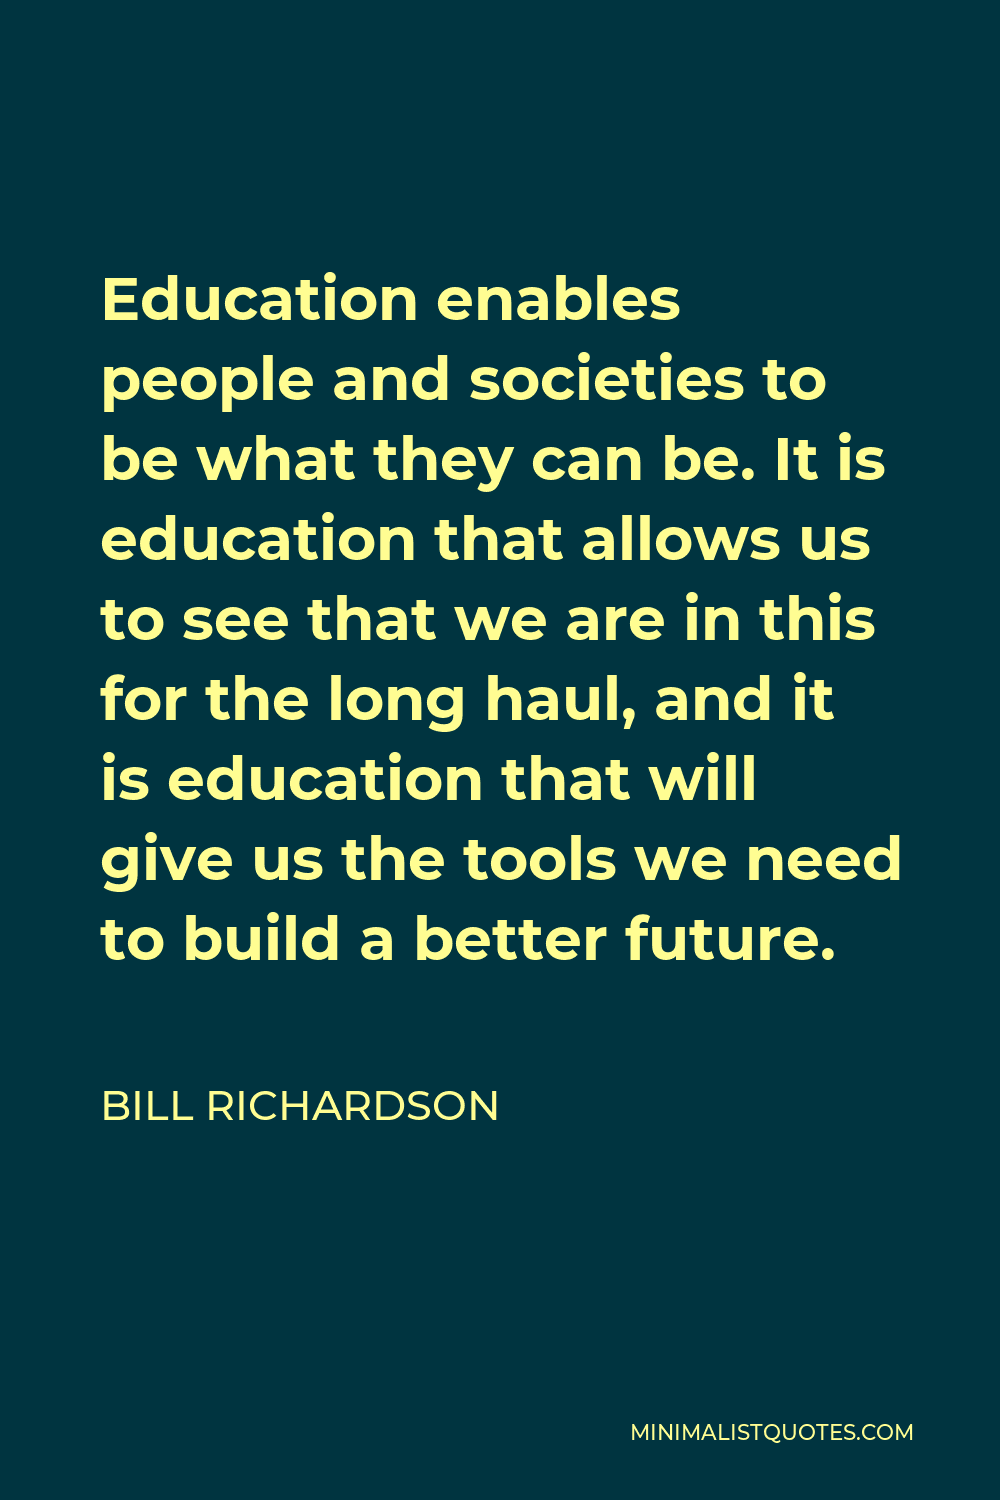 Bill Richardson Quote - Education enables people and societies to be what they can be. It is education that allows us to see that we are in this for the long haul, and it is education that will give us the tools we need to build a better future.